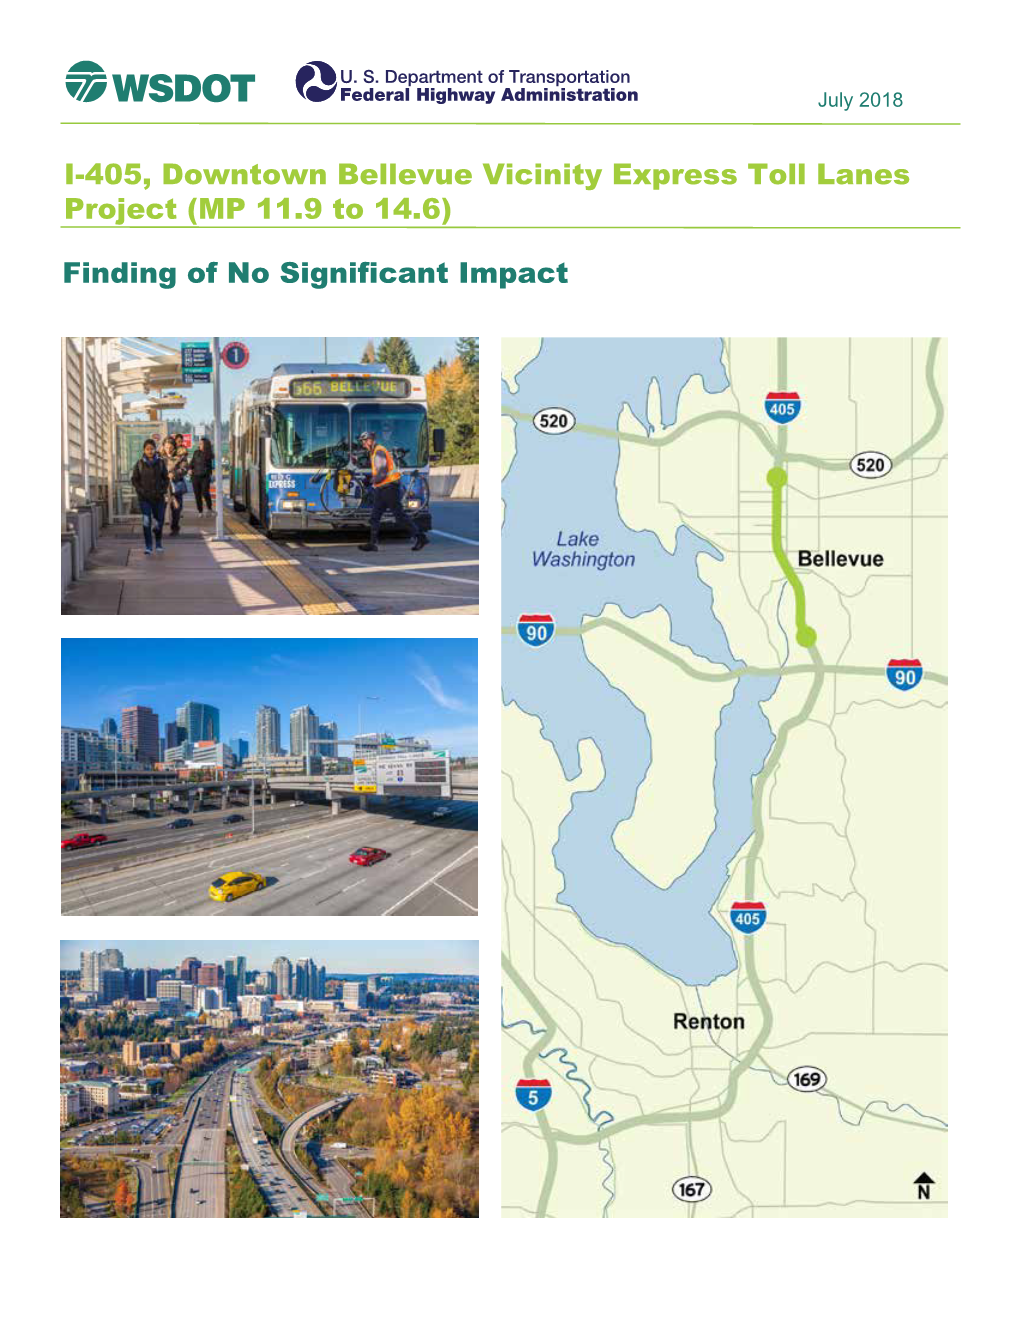 I-405 Downtown Bellevue Vicinity Express Toll Lanes Project Finding